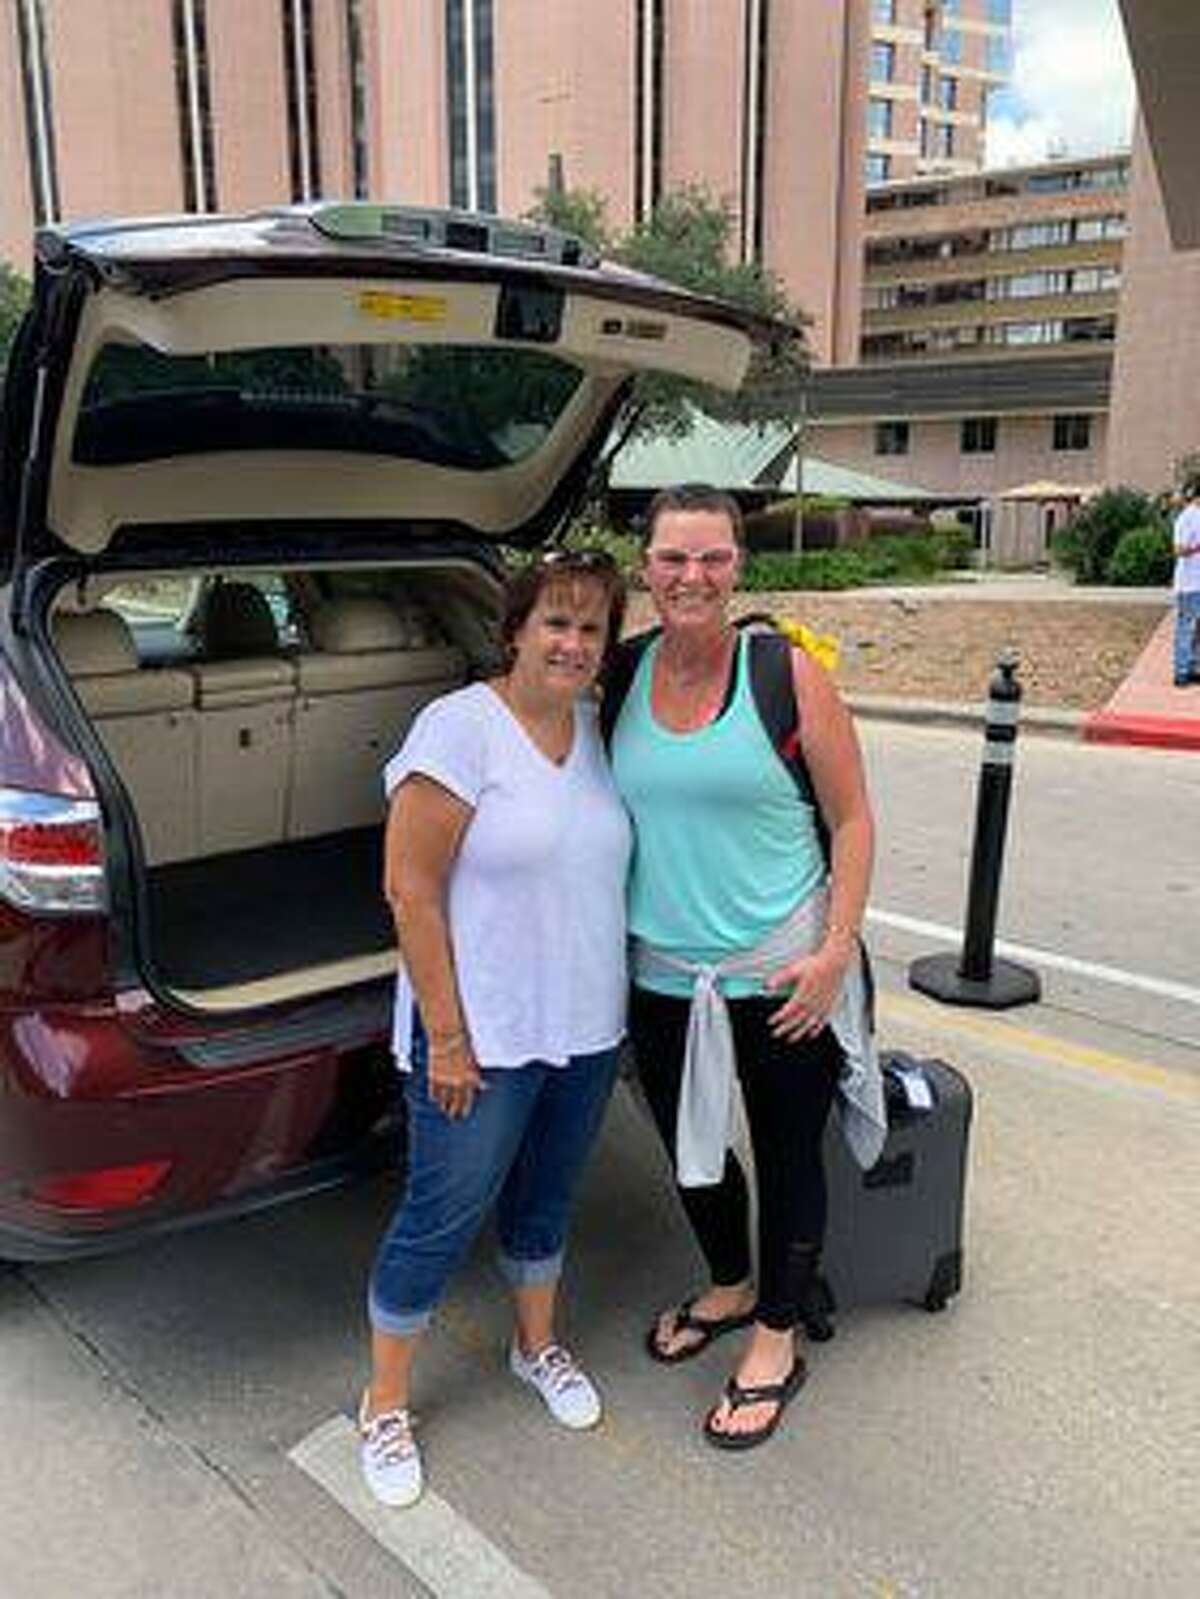 Houston Ground Angels is a nonprofit focused on transporting medical patients to and from appointments and the airport for important procedures.